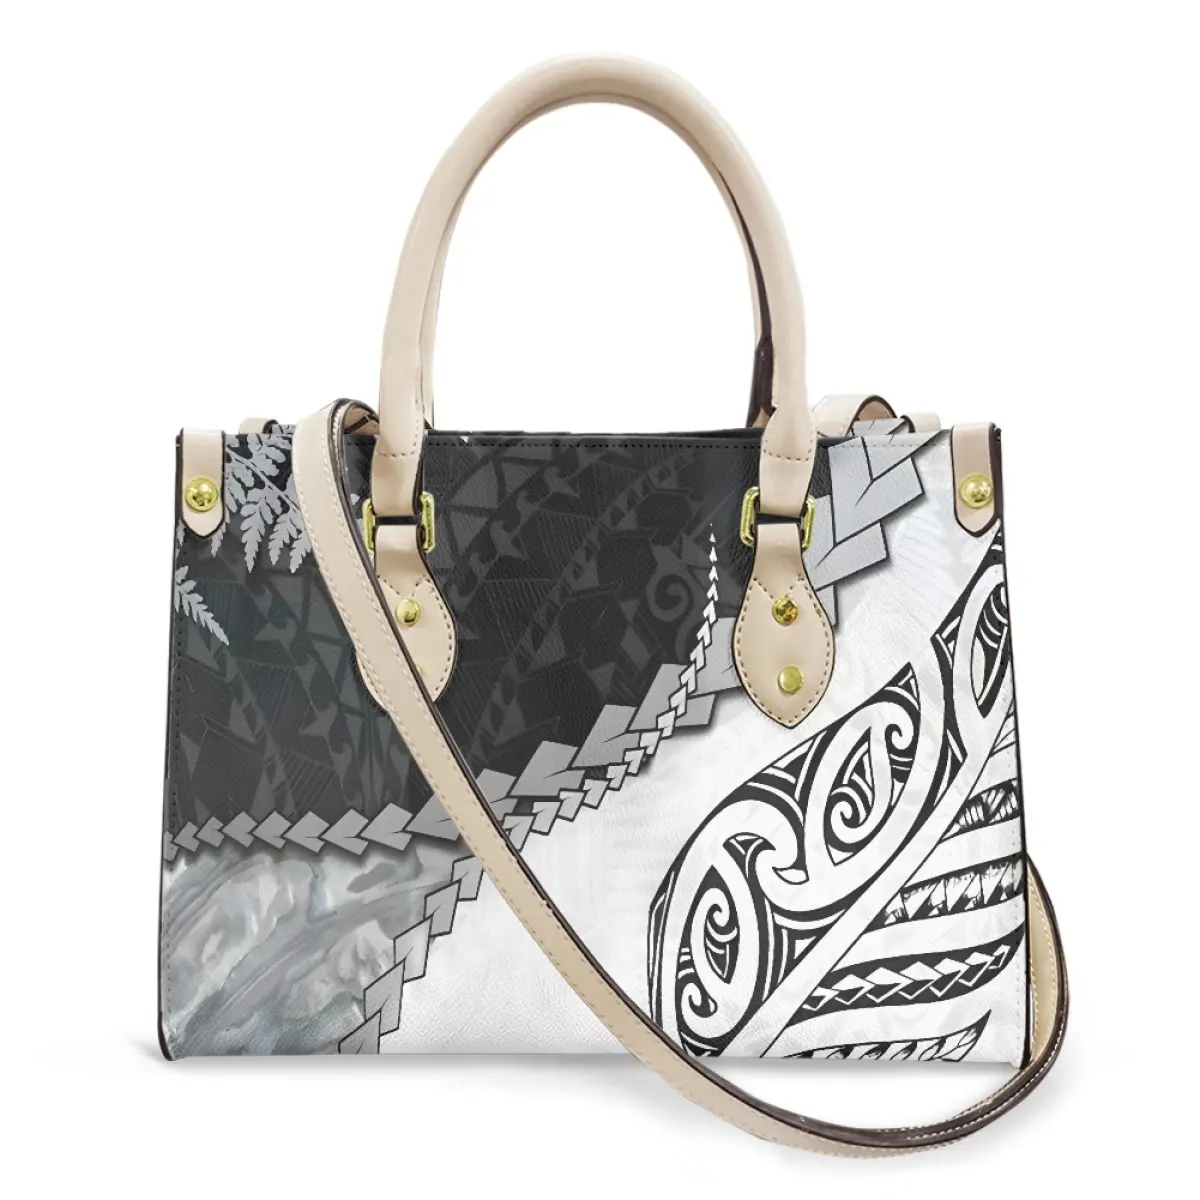 Maori Silver Women's Handnbags Cheap Low Price Print on Demand Casual Small Female Cross Body Shoulder Bags Woman Luxury Leather